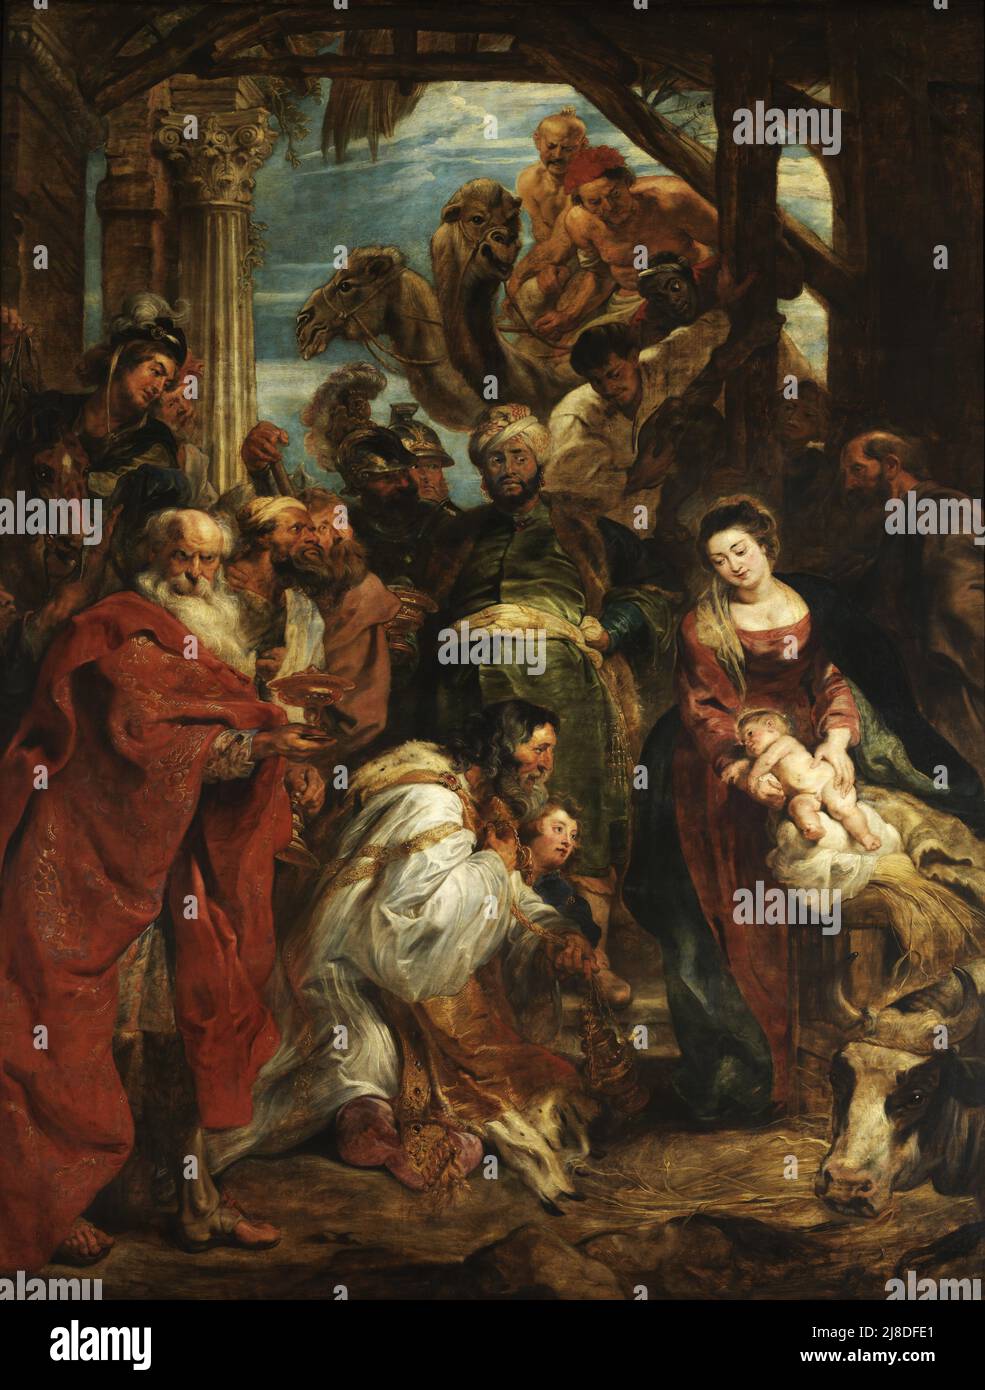 The Adoration of the Magi by Rubens. In this christian myth three wise men or kings come to visit the newborn jesus and acknowledge him as the messiah and son of god. Stock Photo